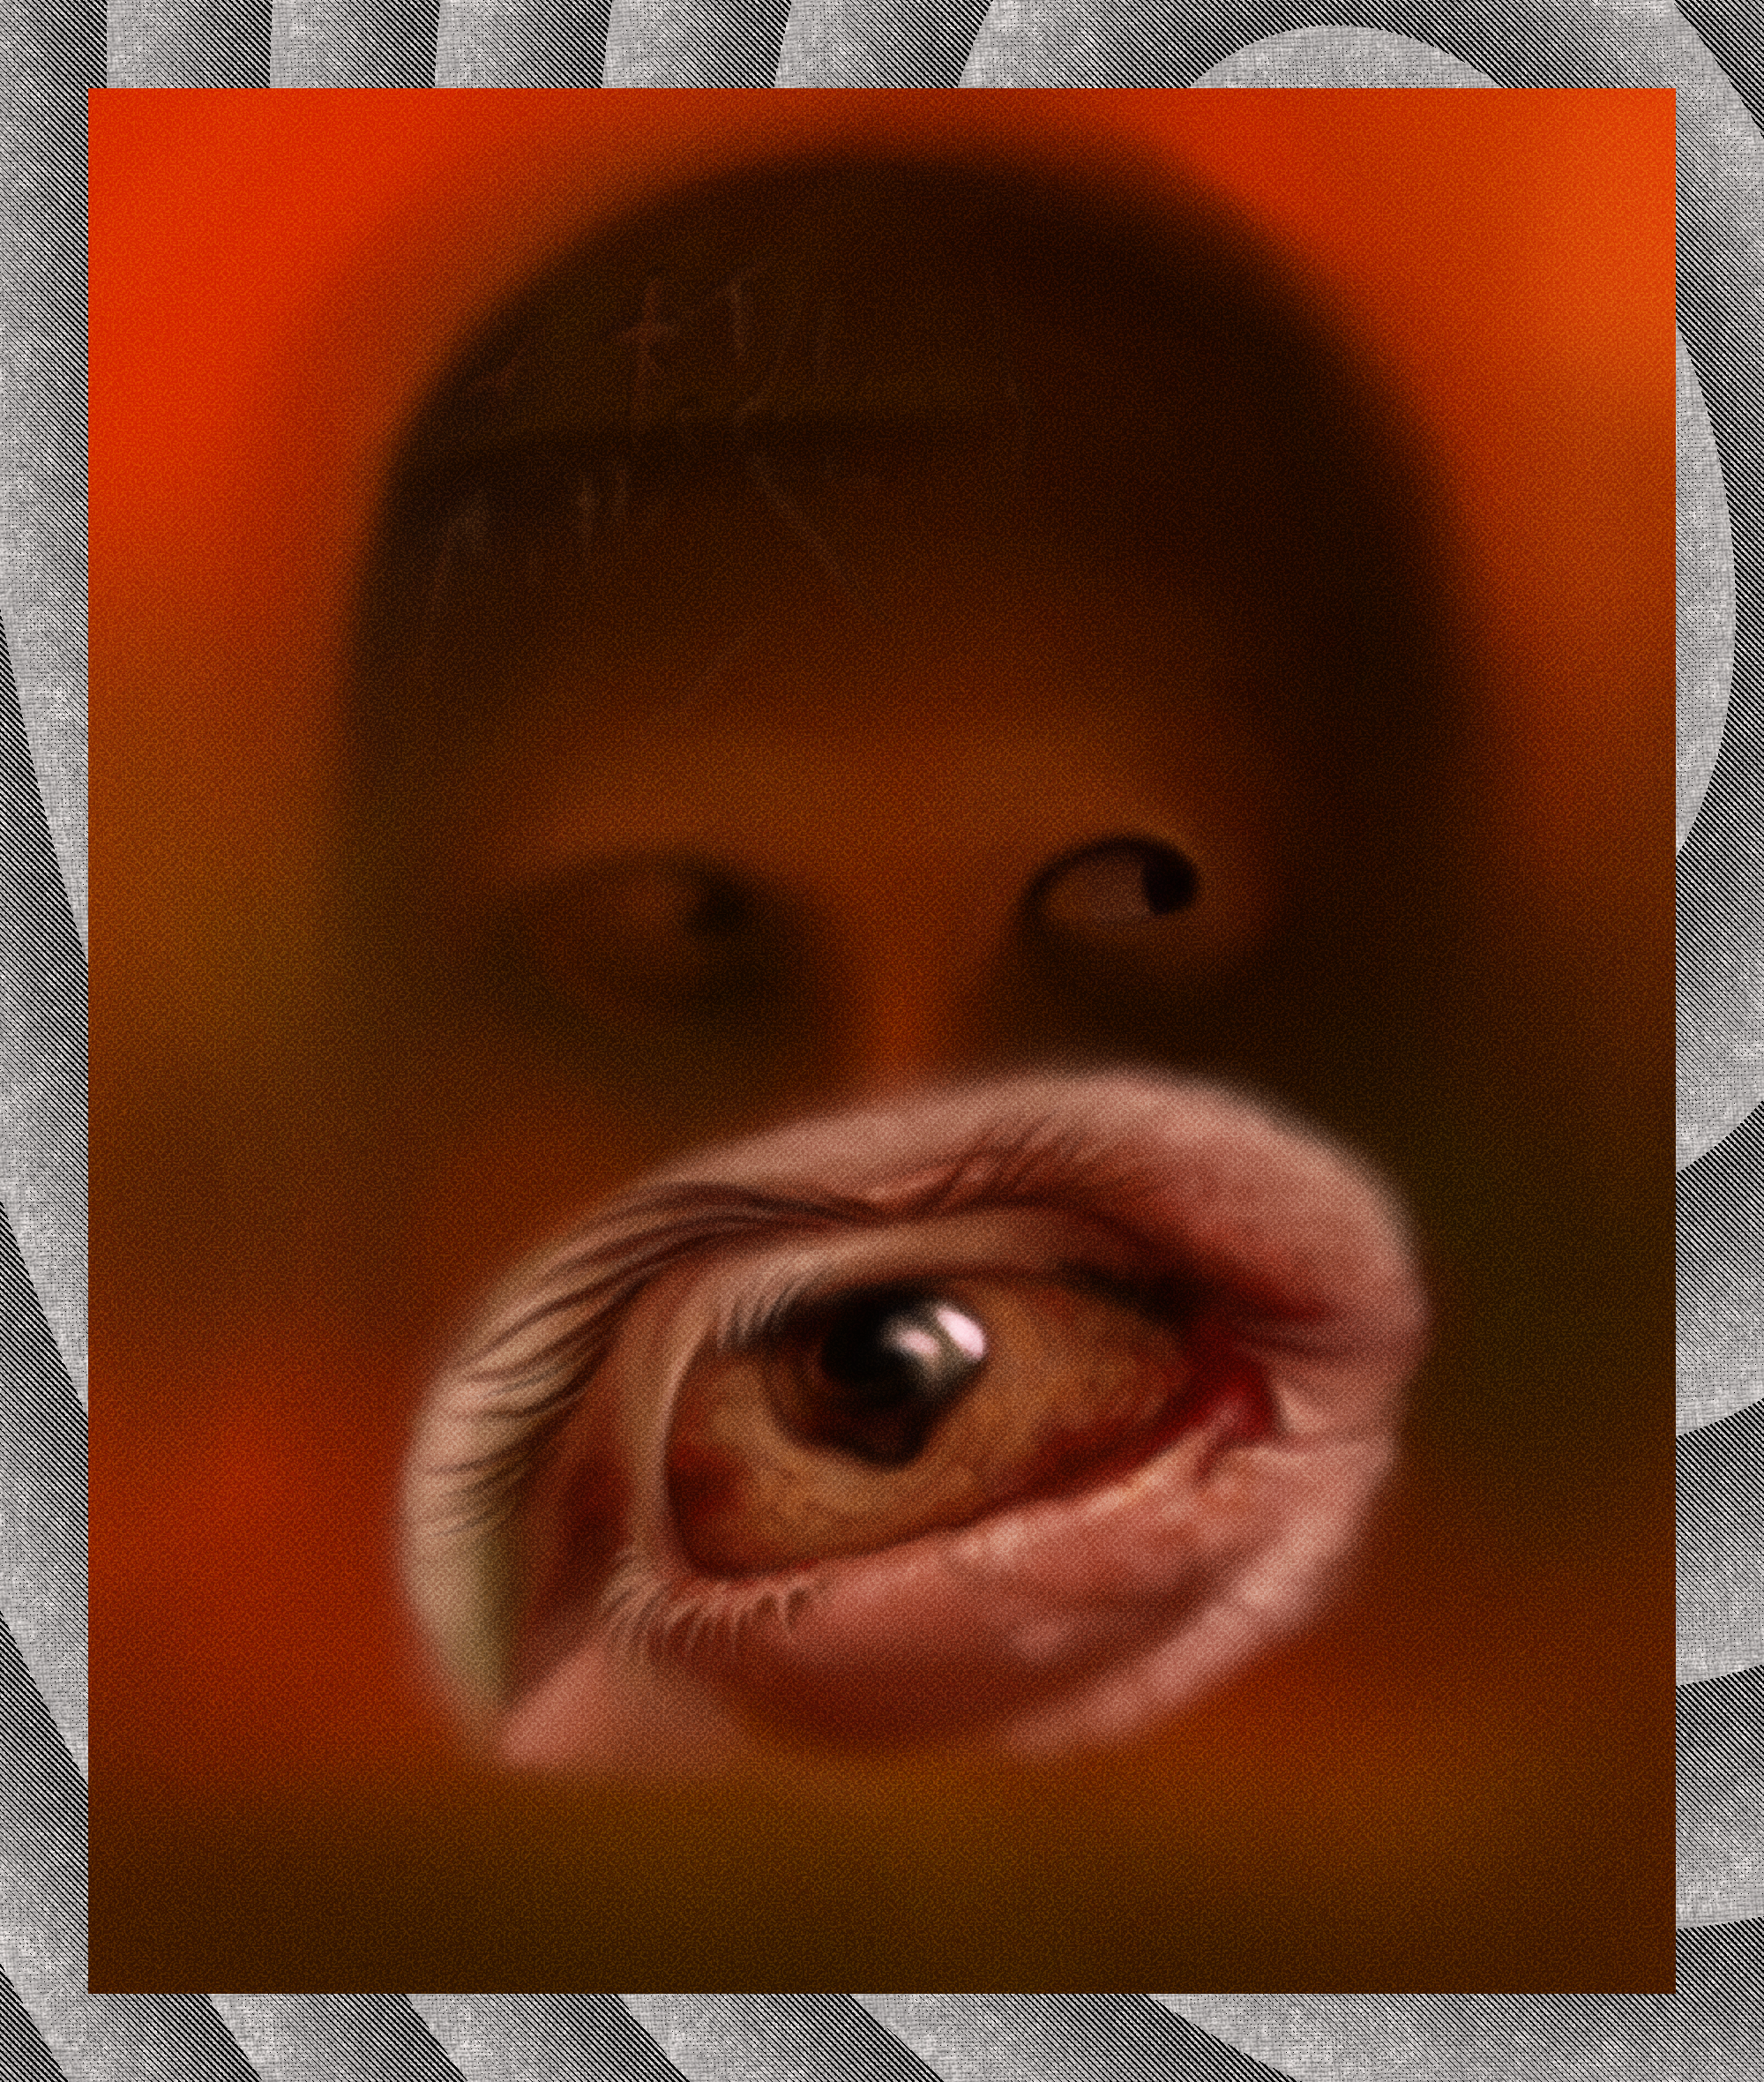 Digital painting of an orange-red abstract field with a face hovering on it with few features, and in front of the face is super-imposed a bloodshot eye with strange anatomy. There is a border around the image that is a radial gradient of dots